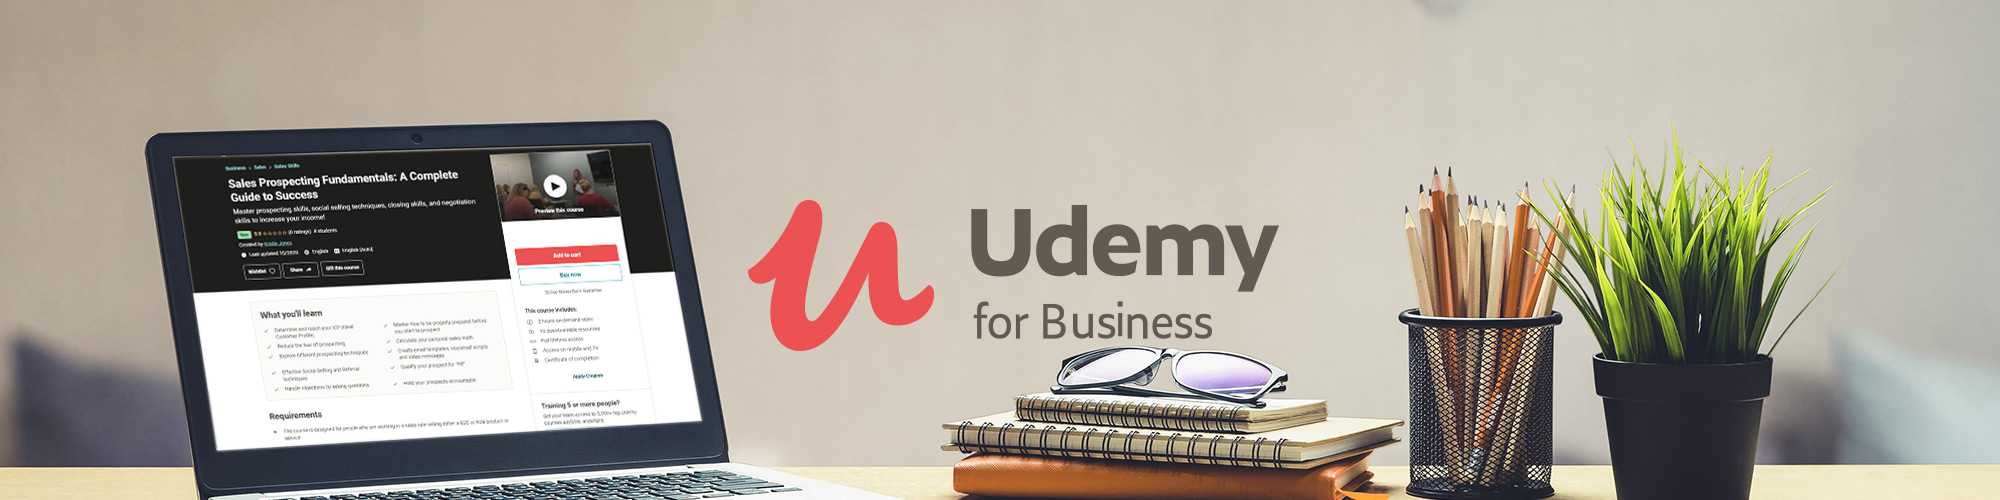 eLearning Now Available through Udemy!